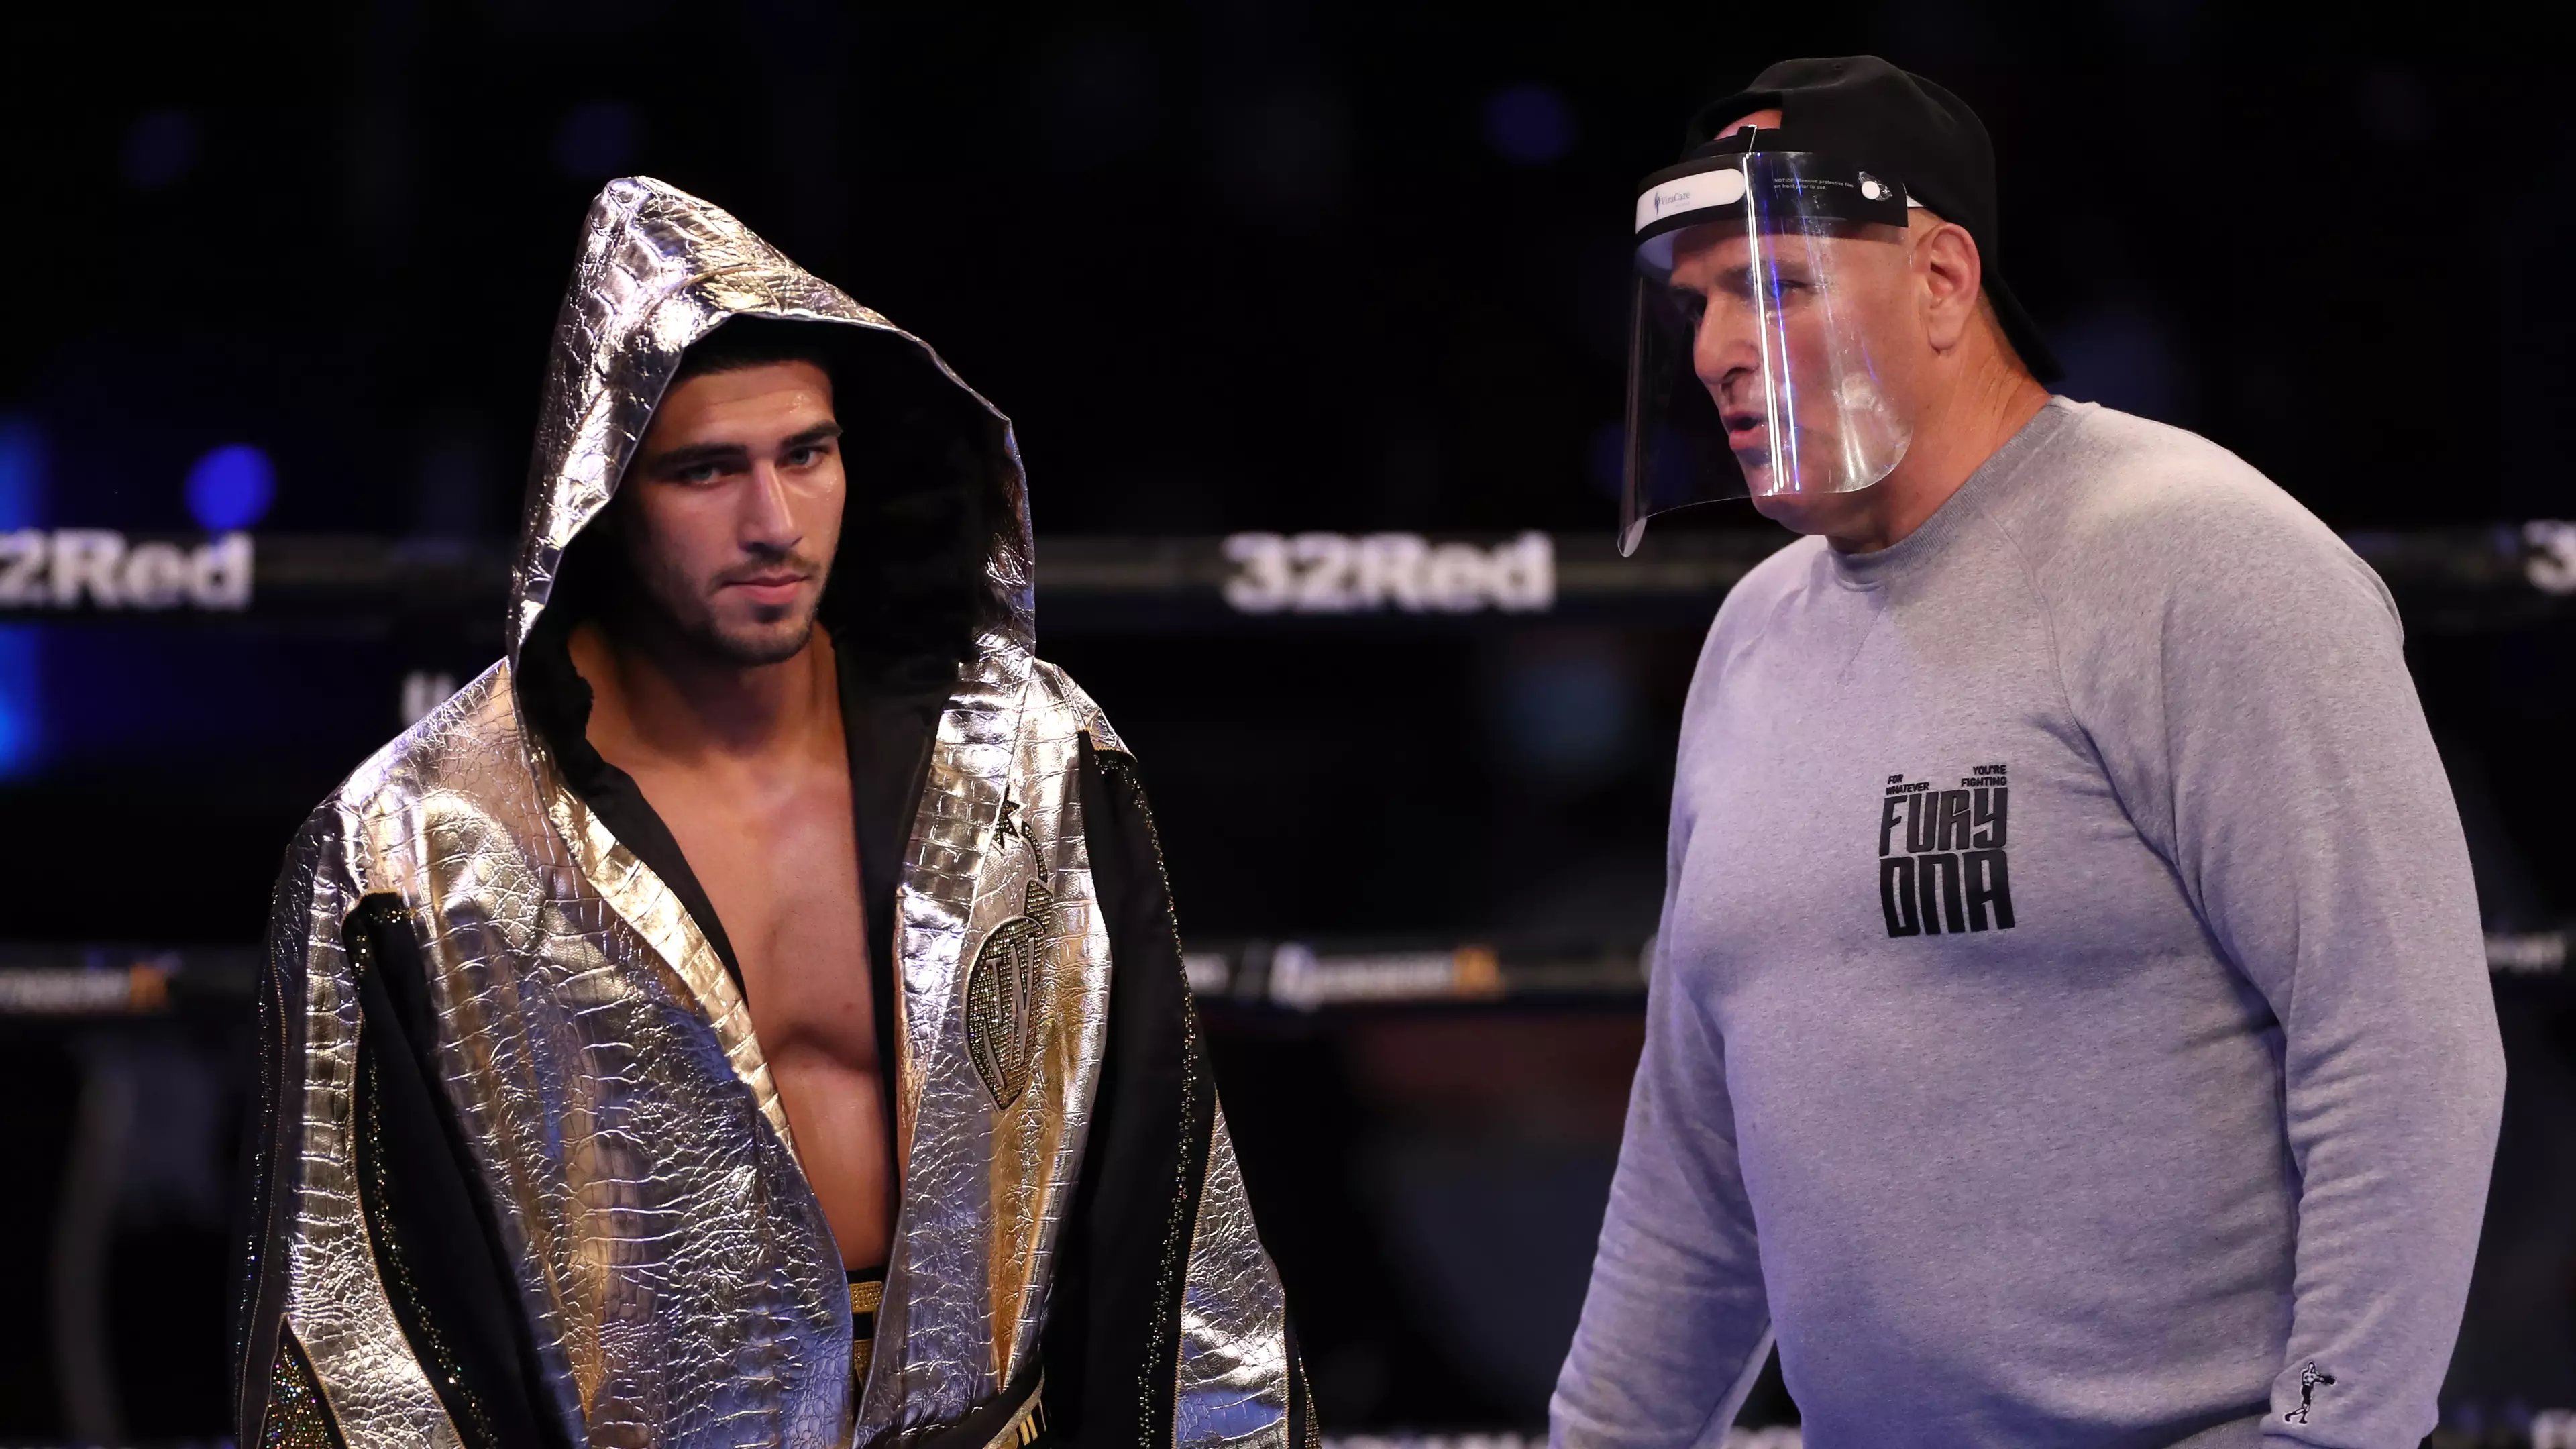 John Fury Blasts ‘Complete idiot’ Who Wrecked Tommy Fury V Jake Paul Fight